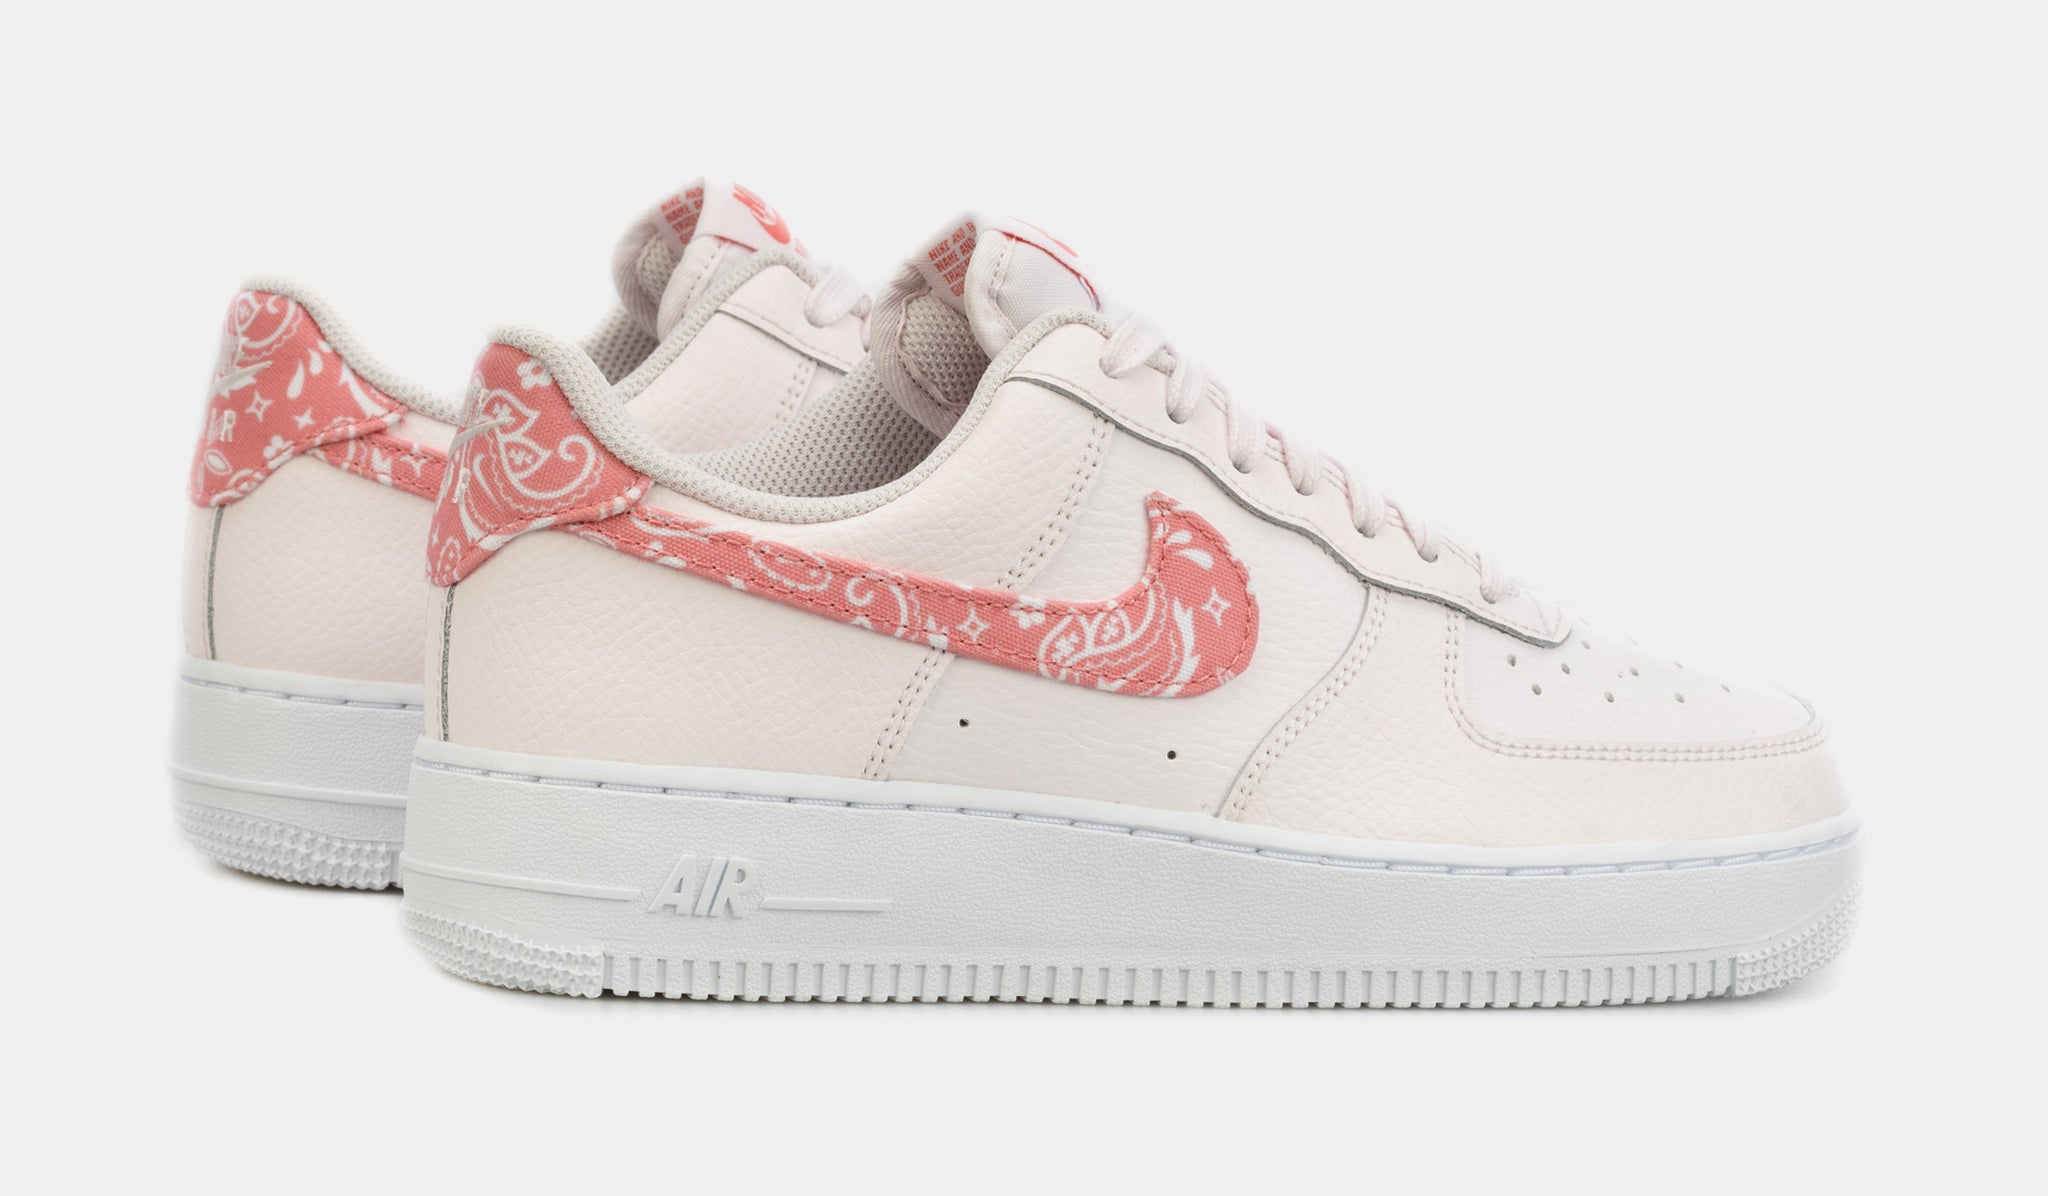 Womens Nike Air Force 1 Pink Paisley Sz 7-12W new $170 🔥🔥🔥🔥🔥 Where  Legends Shop